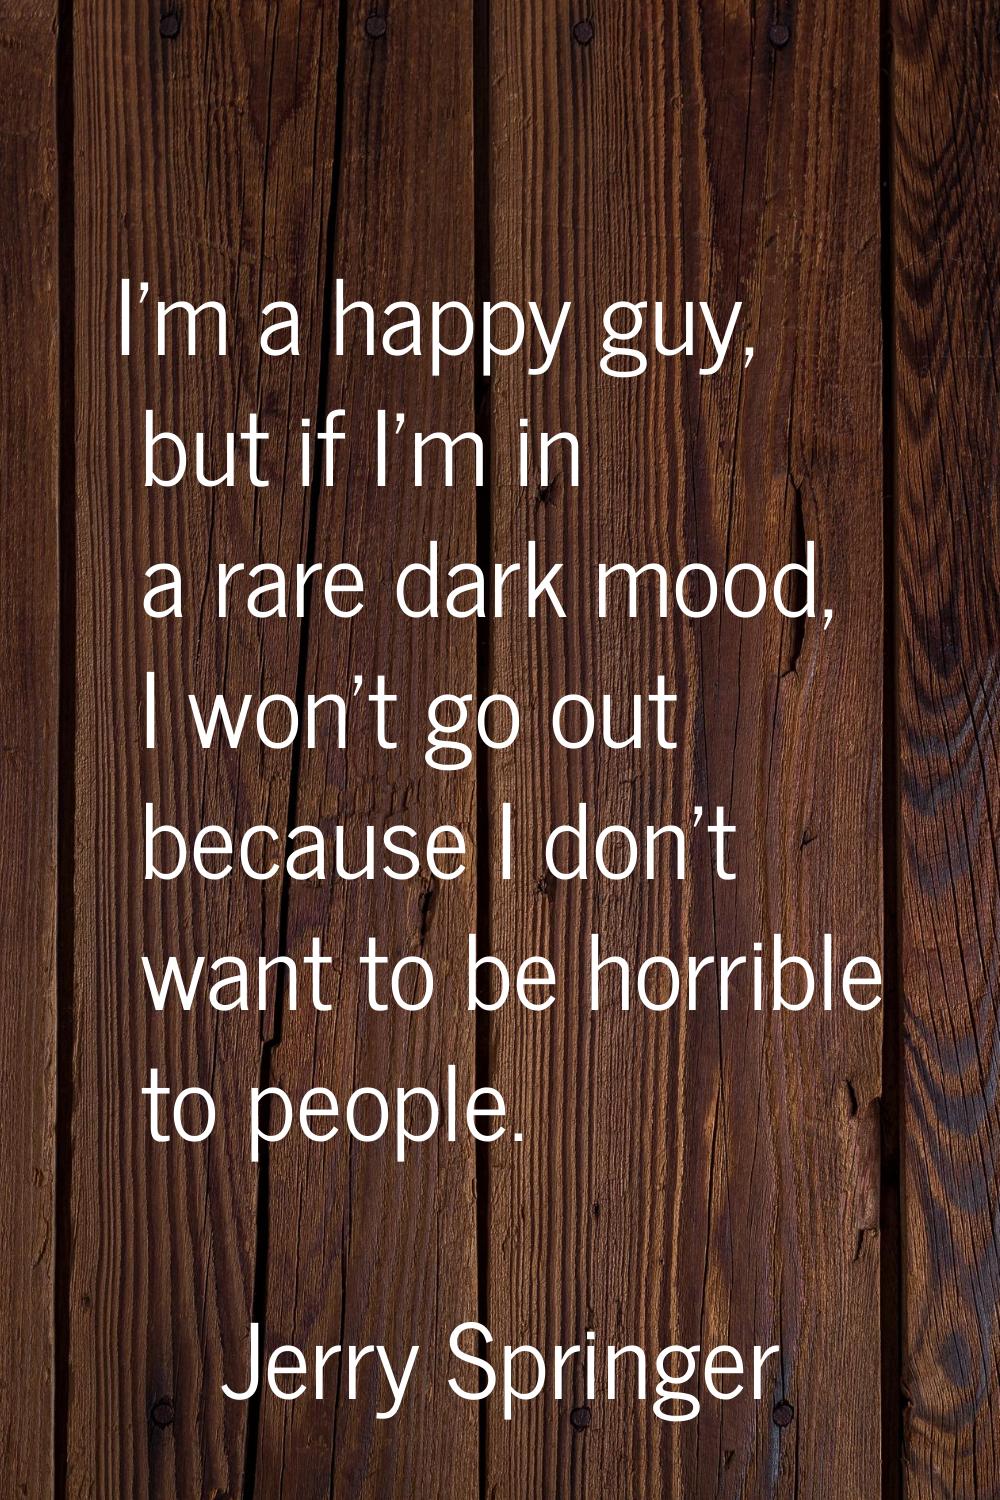 I'm a happy guy, but if I'm in a rare dark mood, I won't go out because I don't want to be horrible